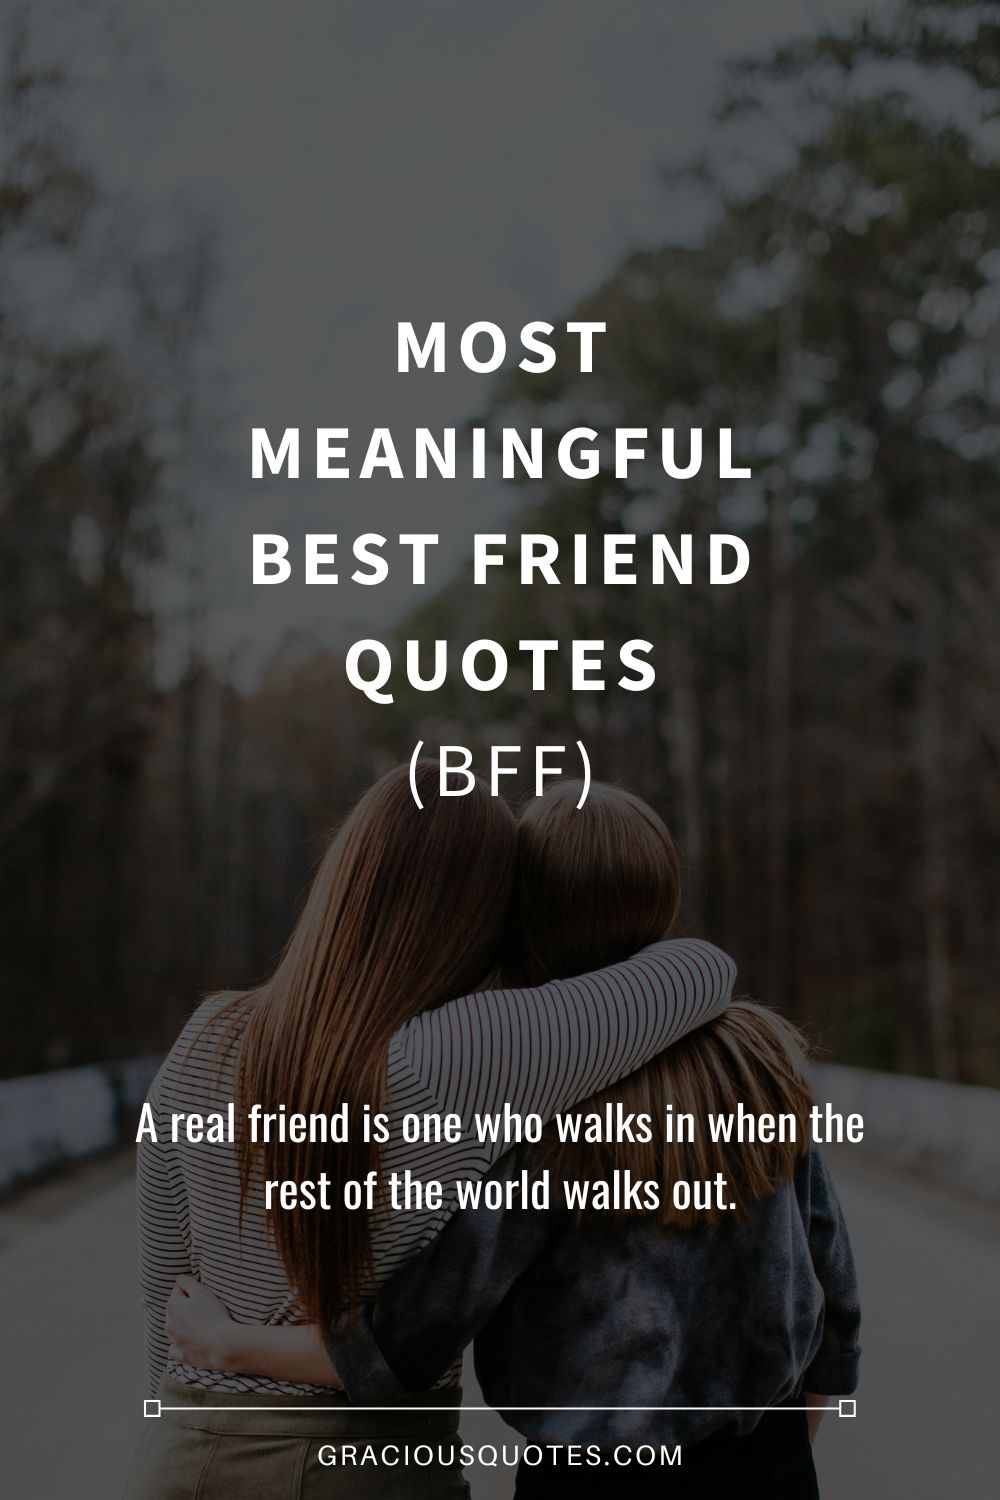 Most Meaningful Best Friend Quotes (BFF) - Gracious Quotes